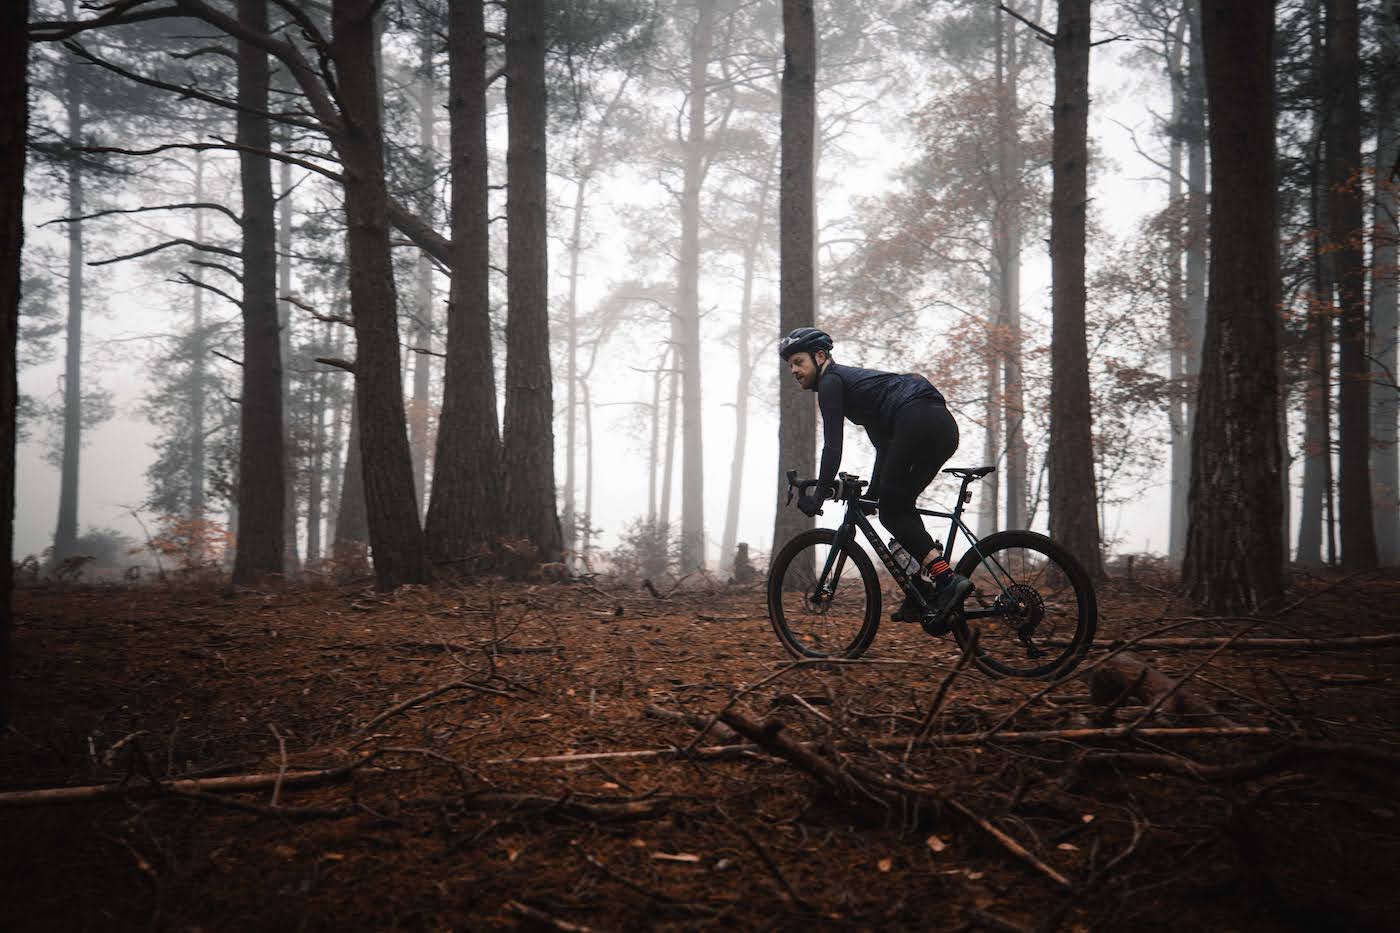 British cycling brand parcours launch ‘watts for trees’ initiative in partnership with ecologi